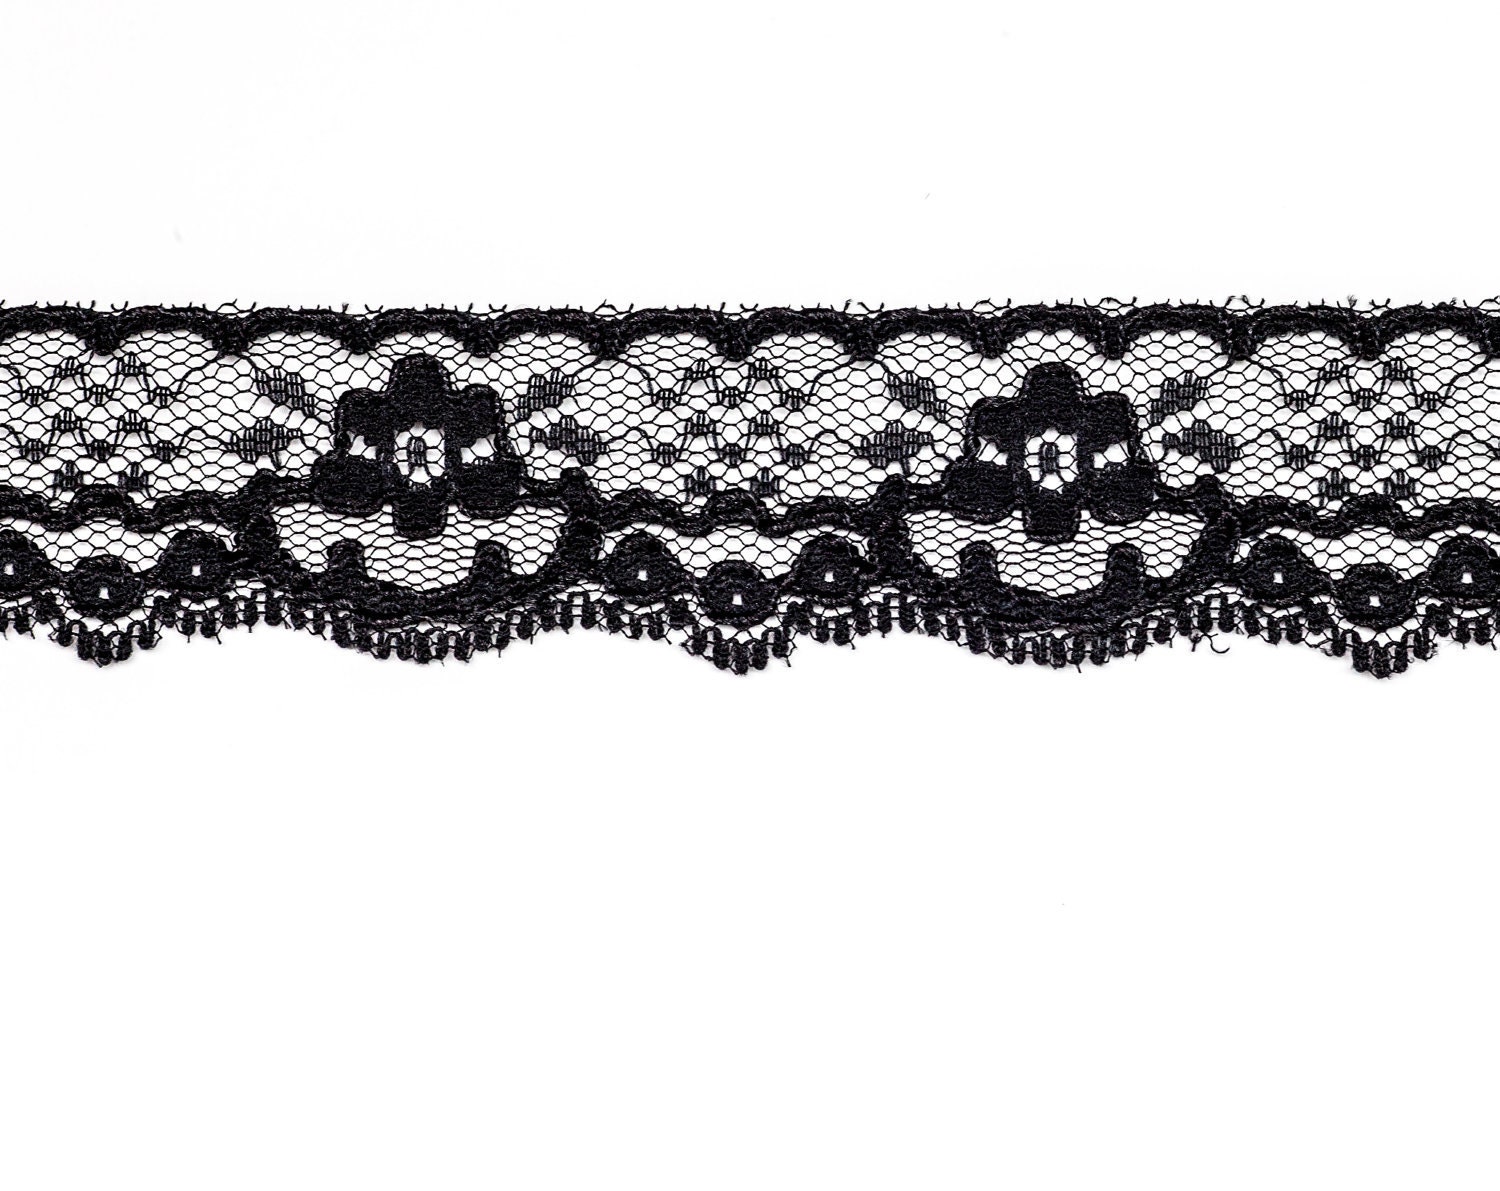 10 1/2 Yards Vintage Black Lace Trim with a Scalloped Edge.